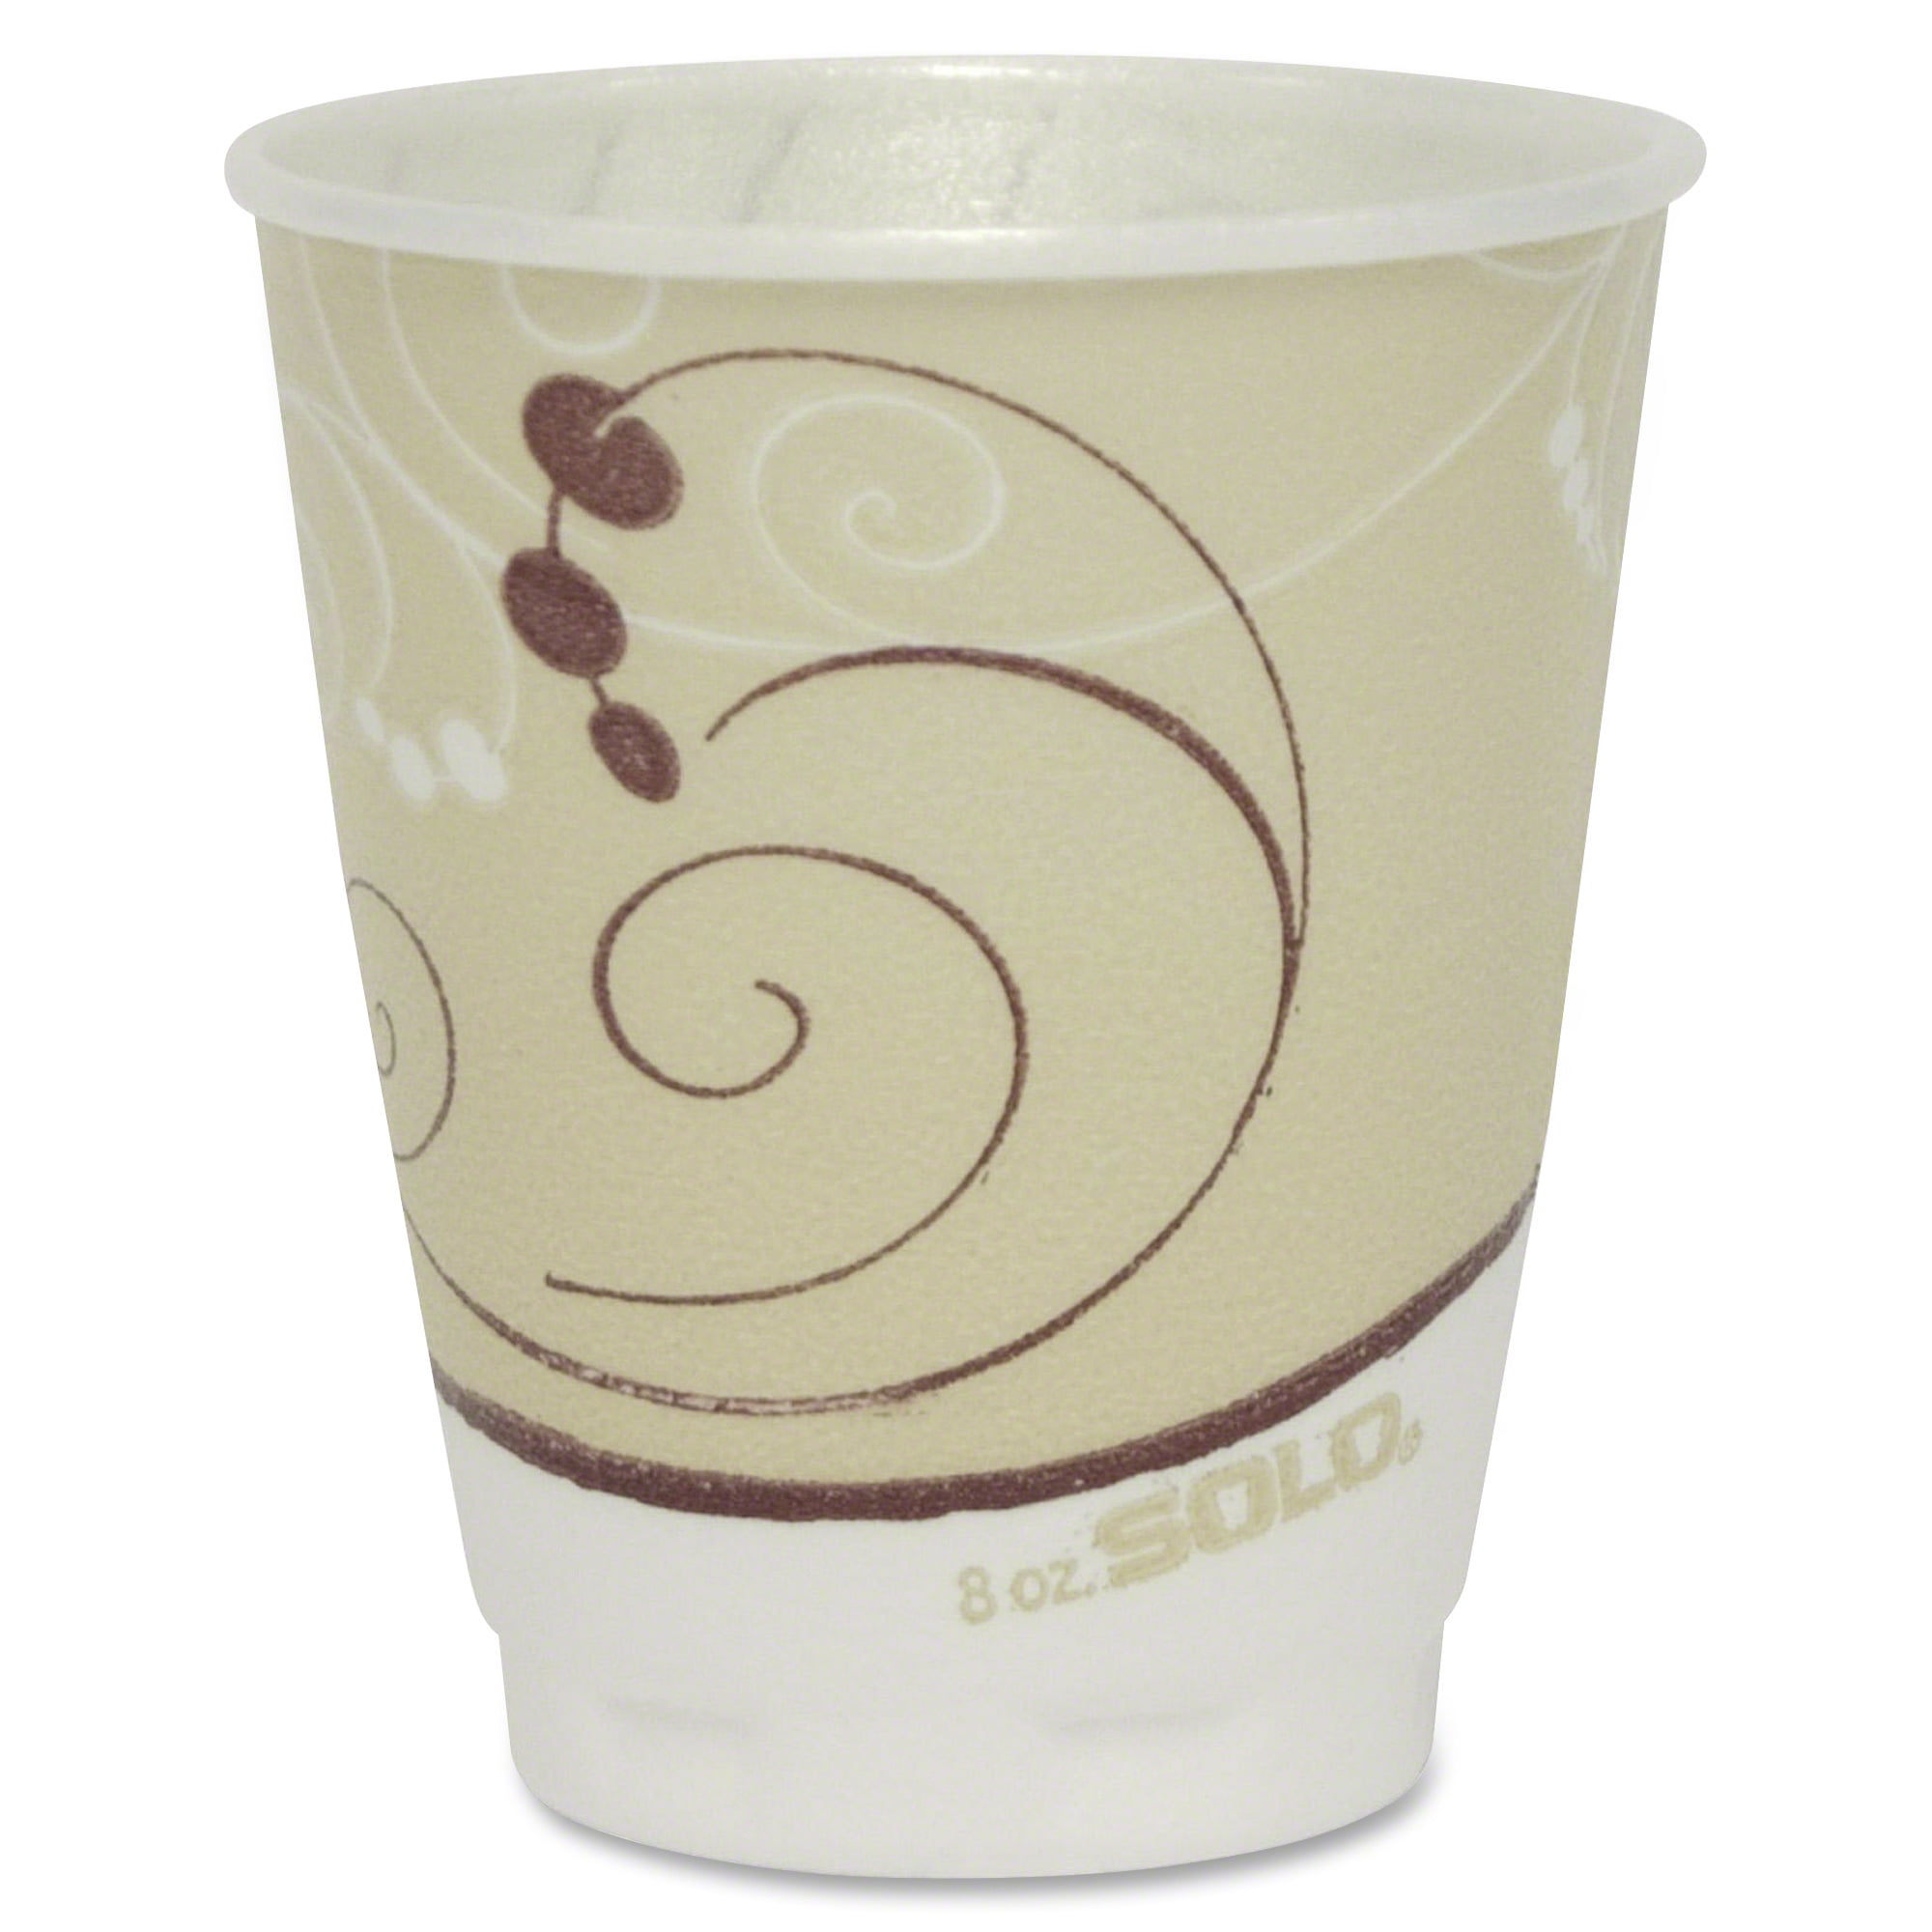 Styrofoam Coffee Cups Hot Cold Beverage White Foam Drink Cup 8 ounce 1000 Ct New 